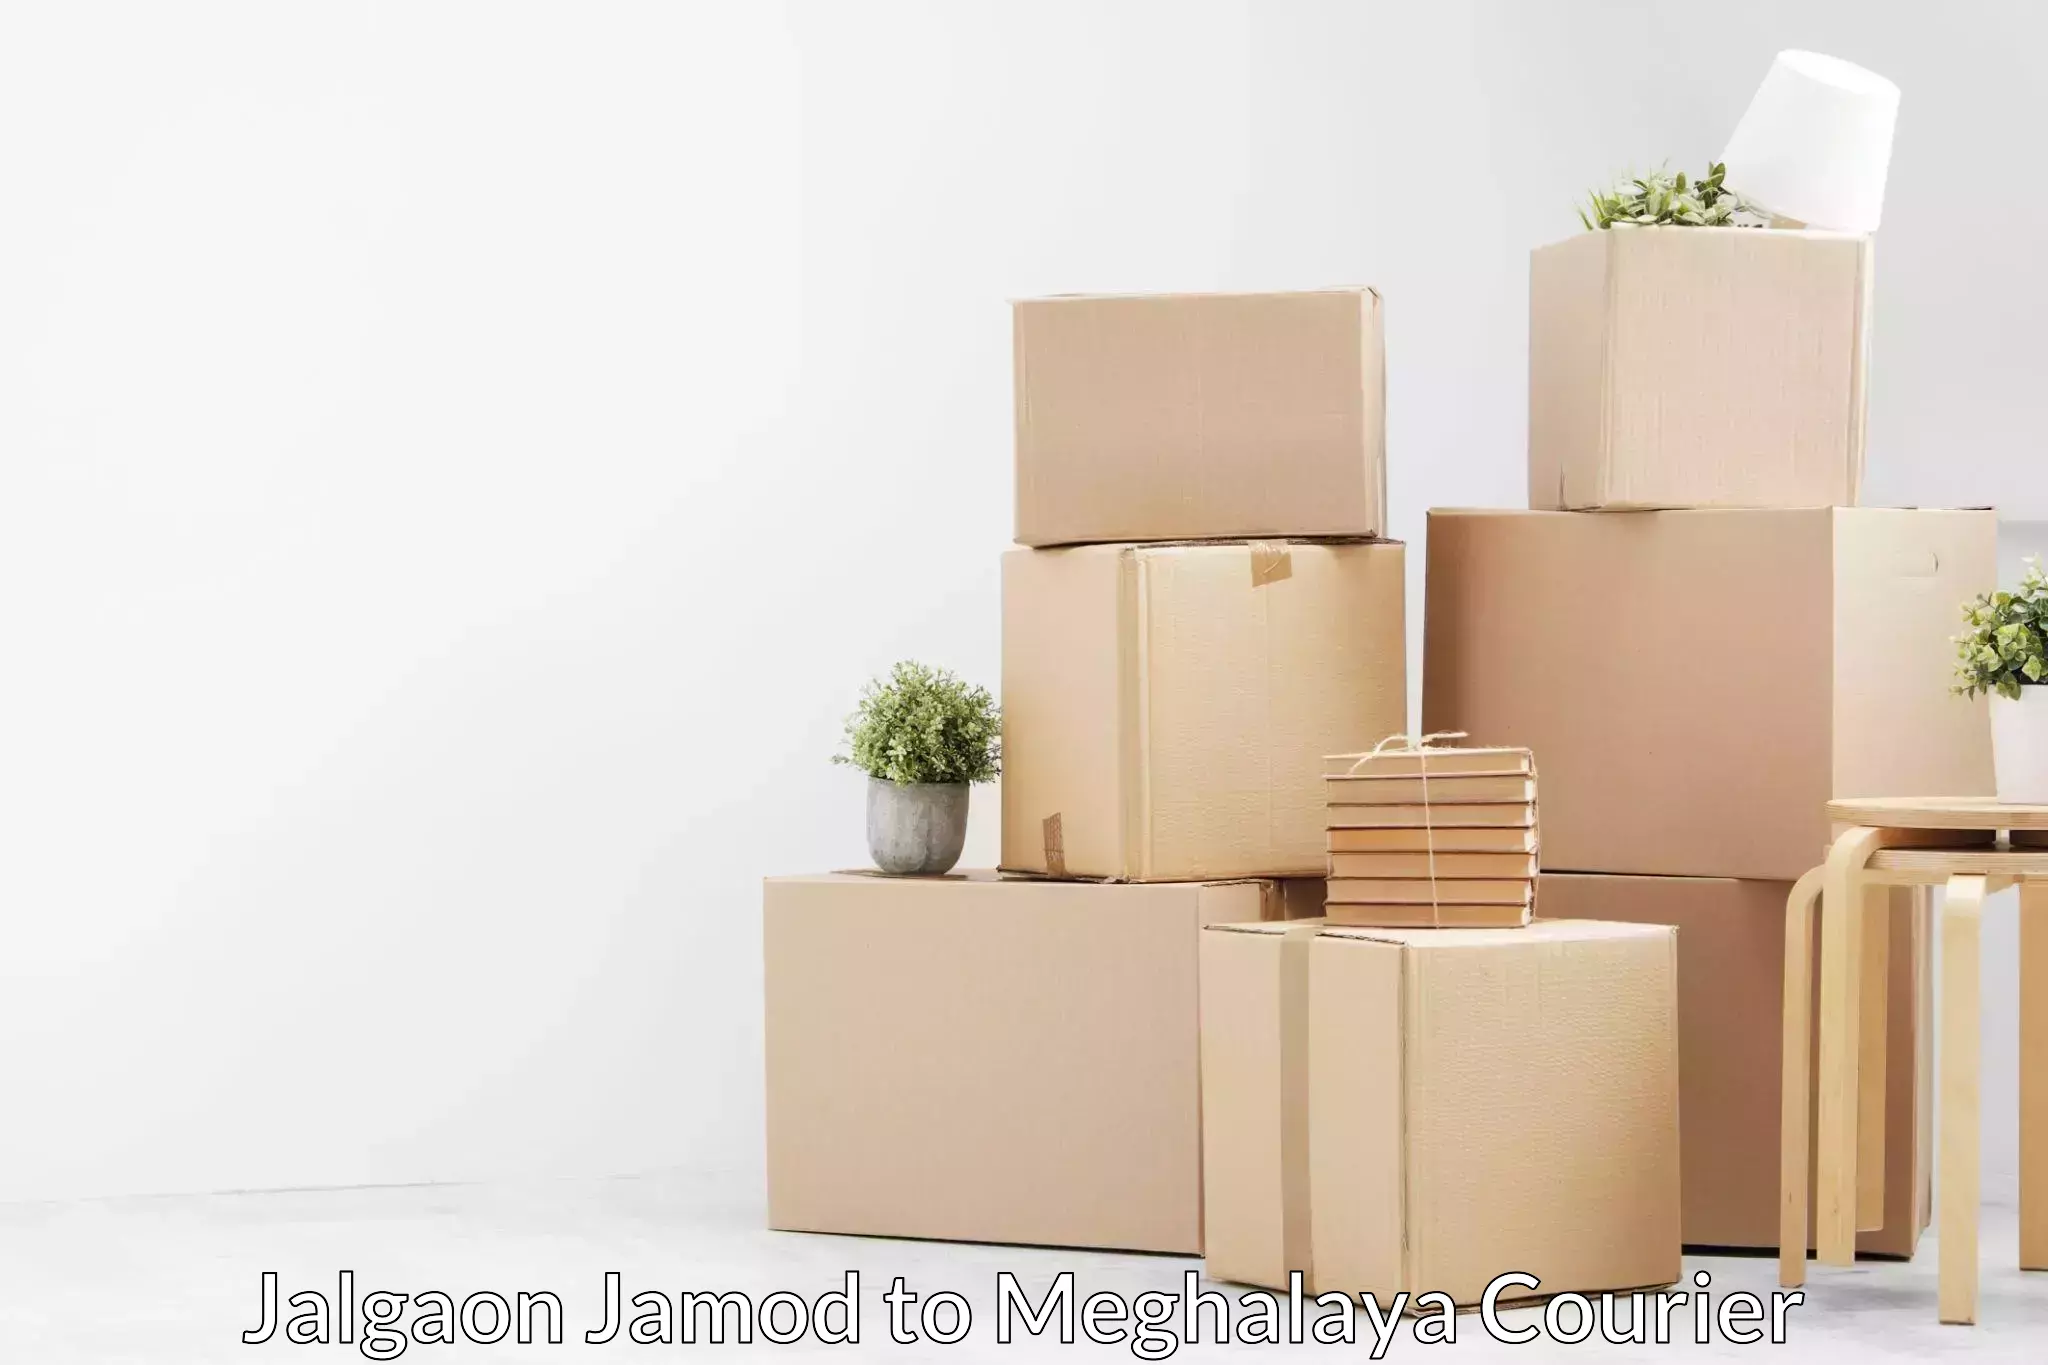 Professional furniture relocation in Jalgaon Jamod to Umsaw